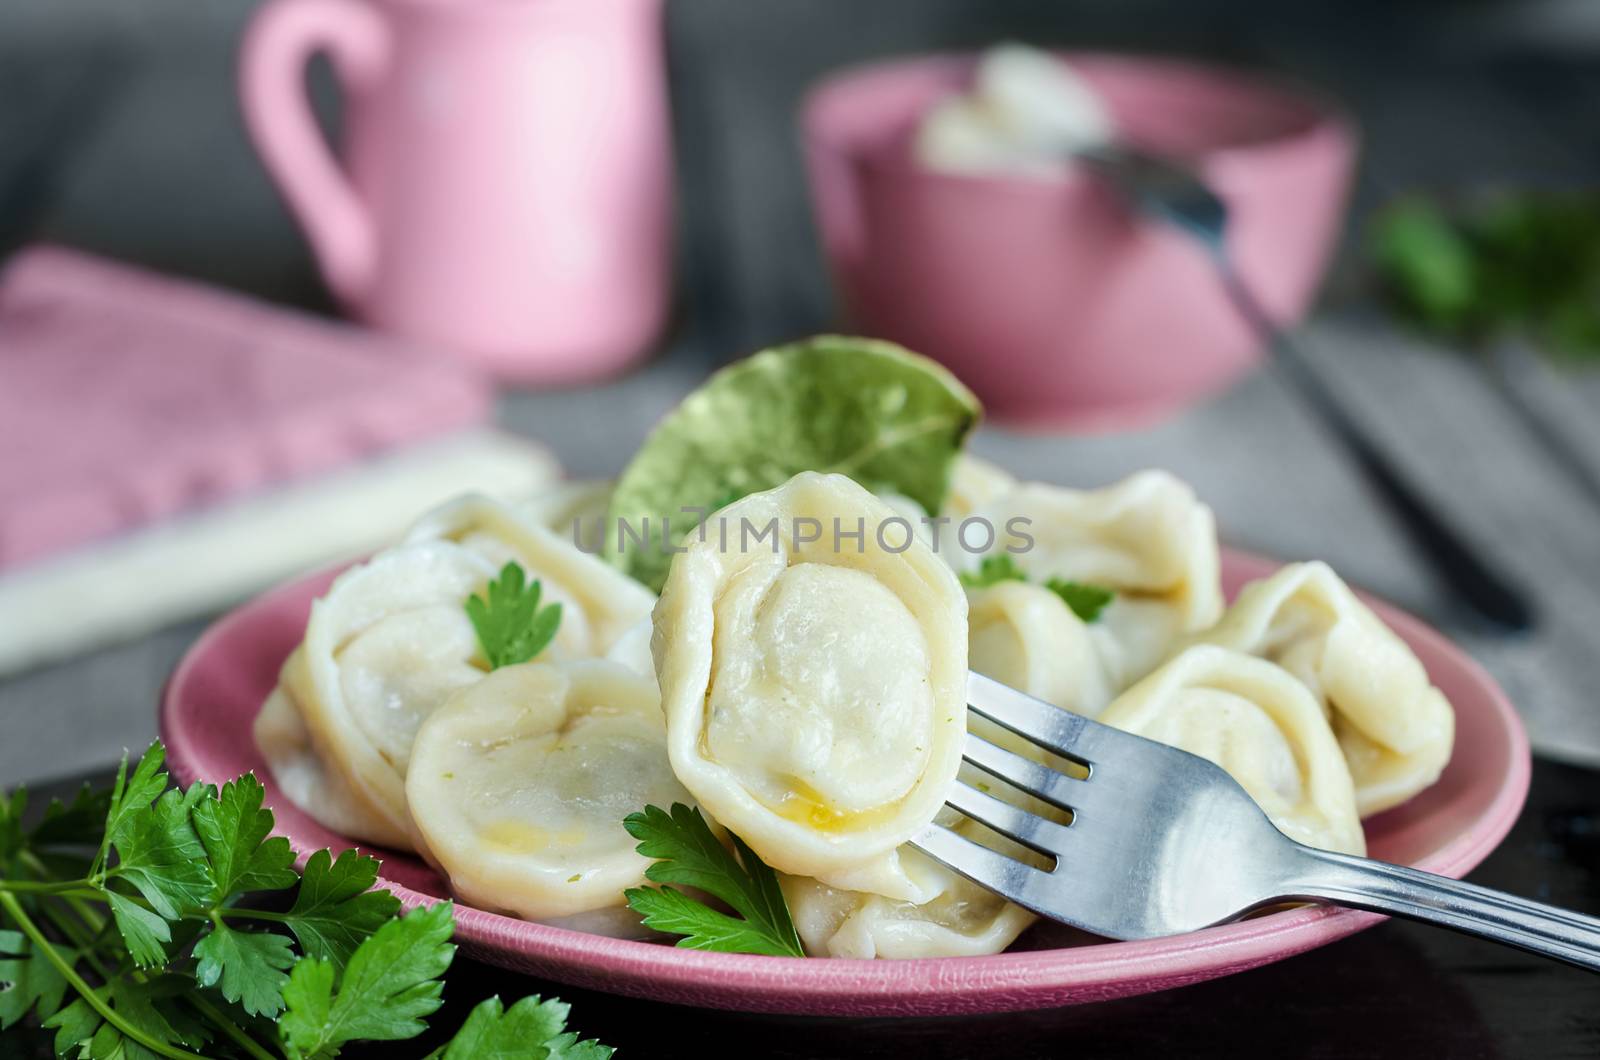 Dumplings on a plate and a fork, gray-blue background, rustic style. Utensils and napkins in the background, low key and bokeh.